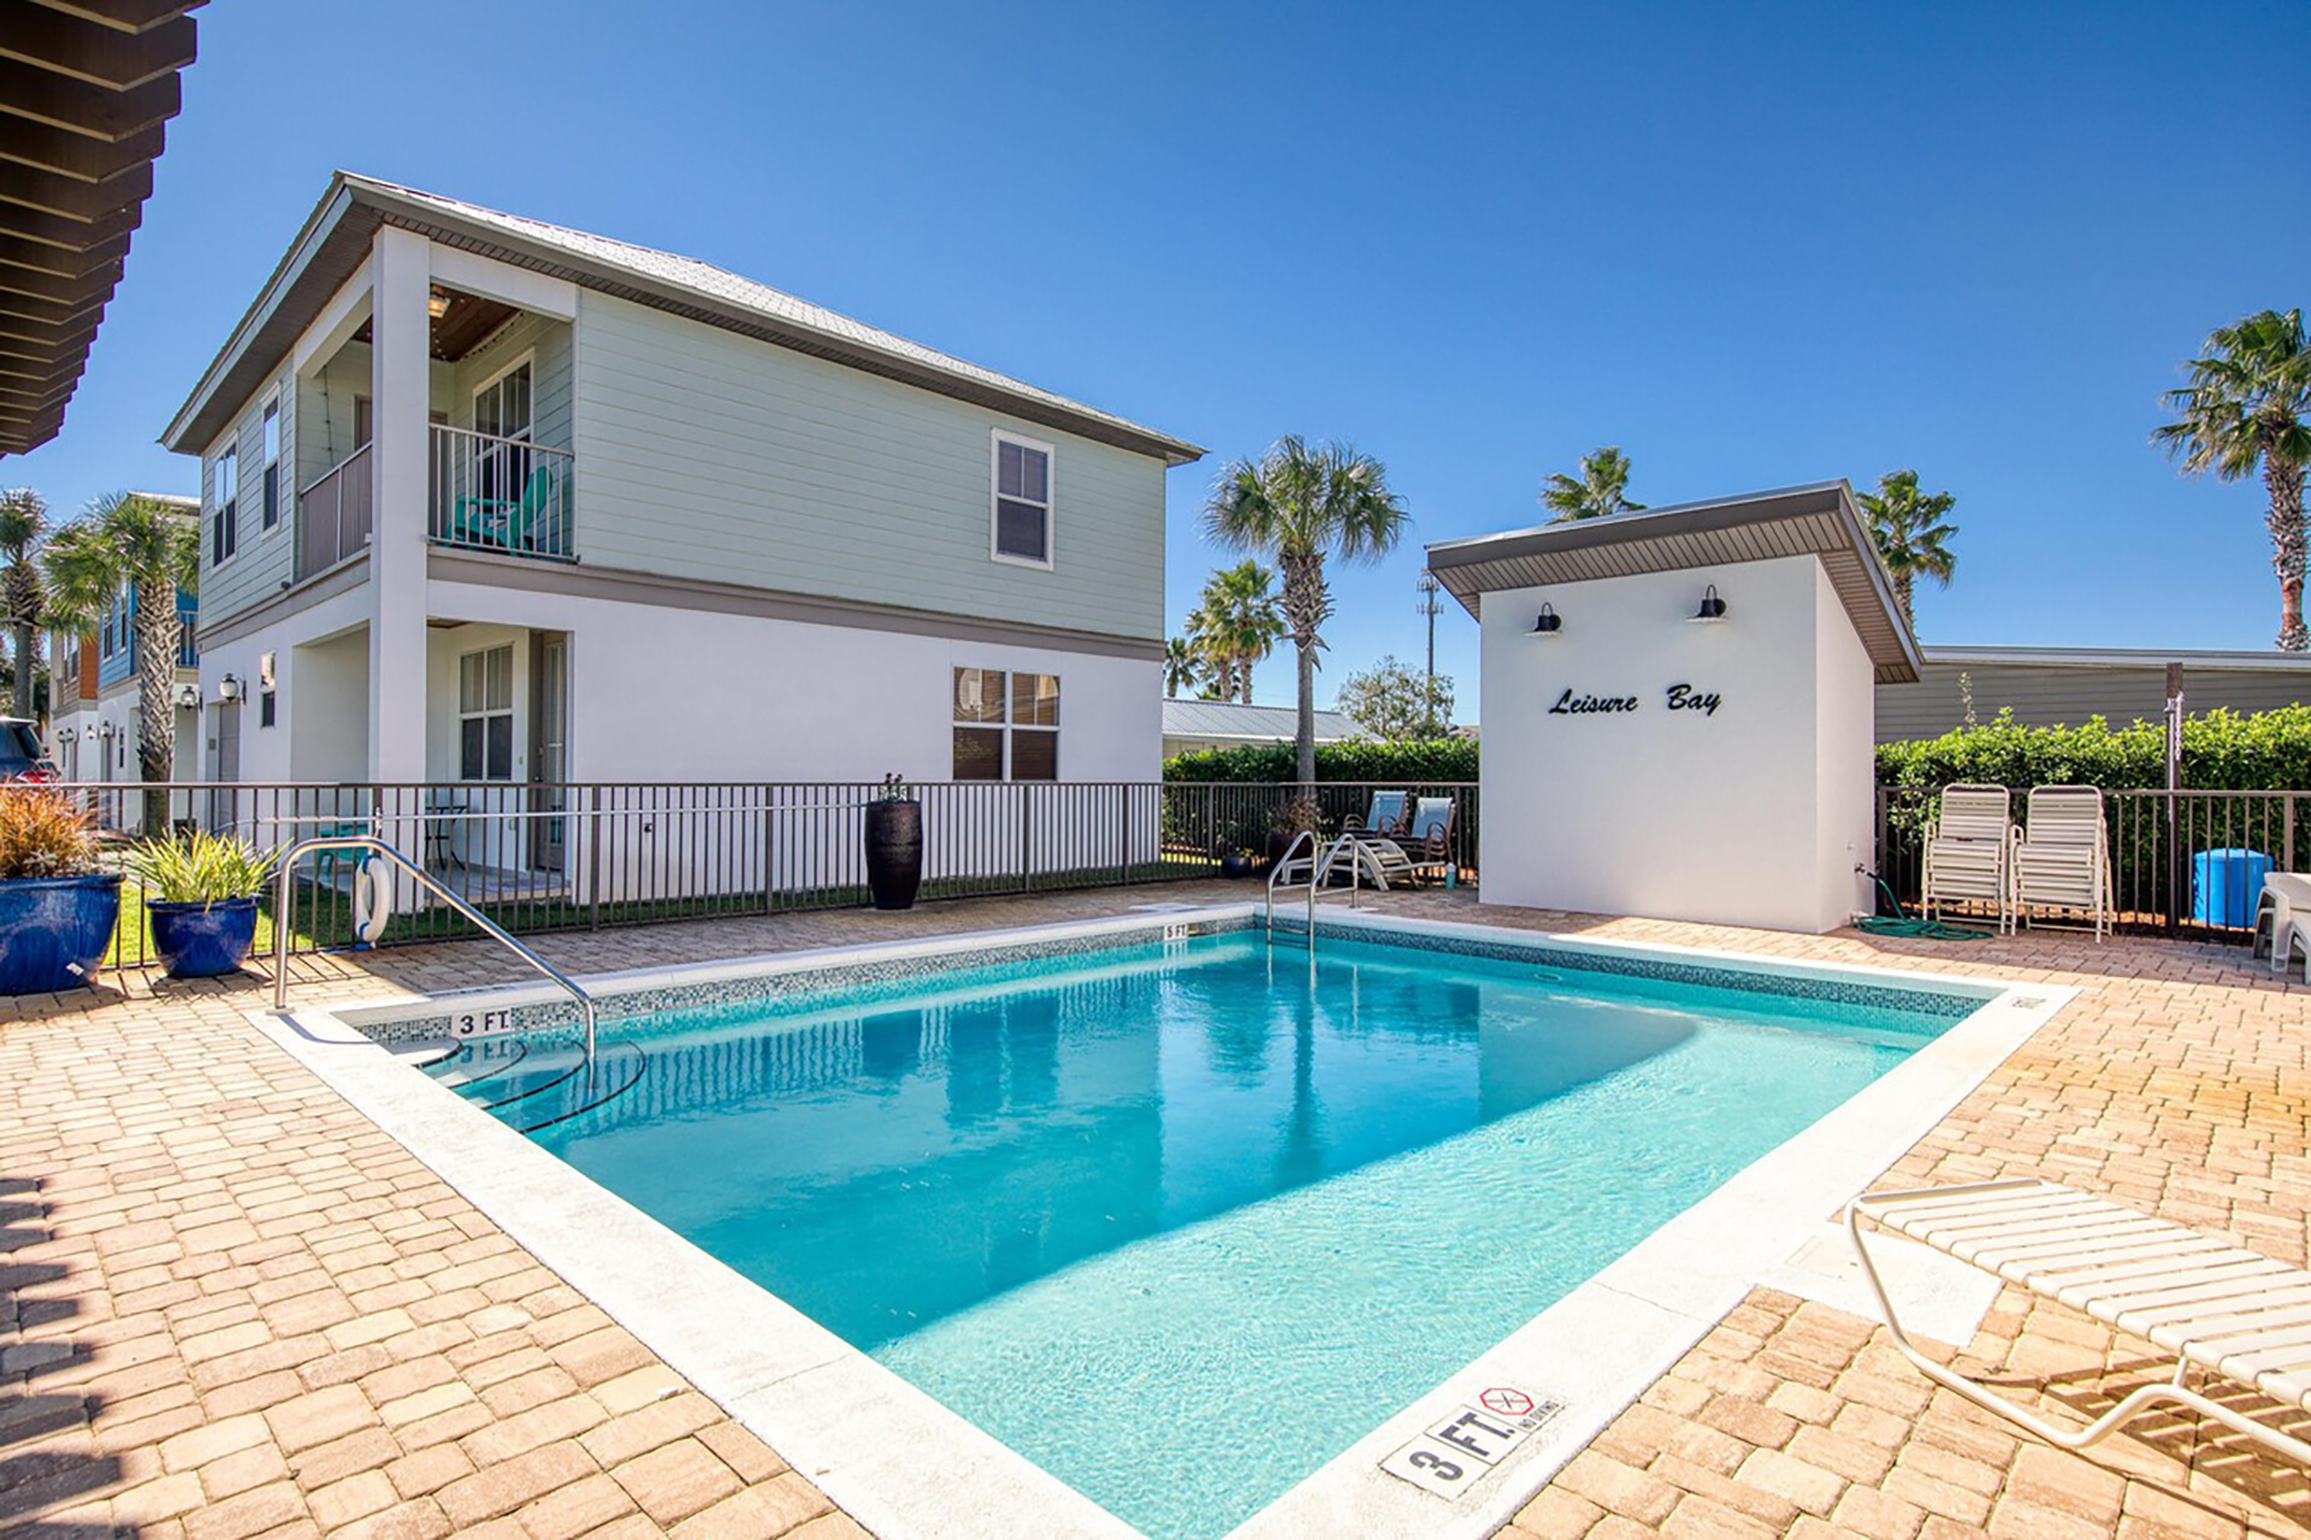 Enjoy a day by the pool - just across the street!